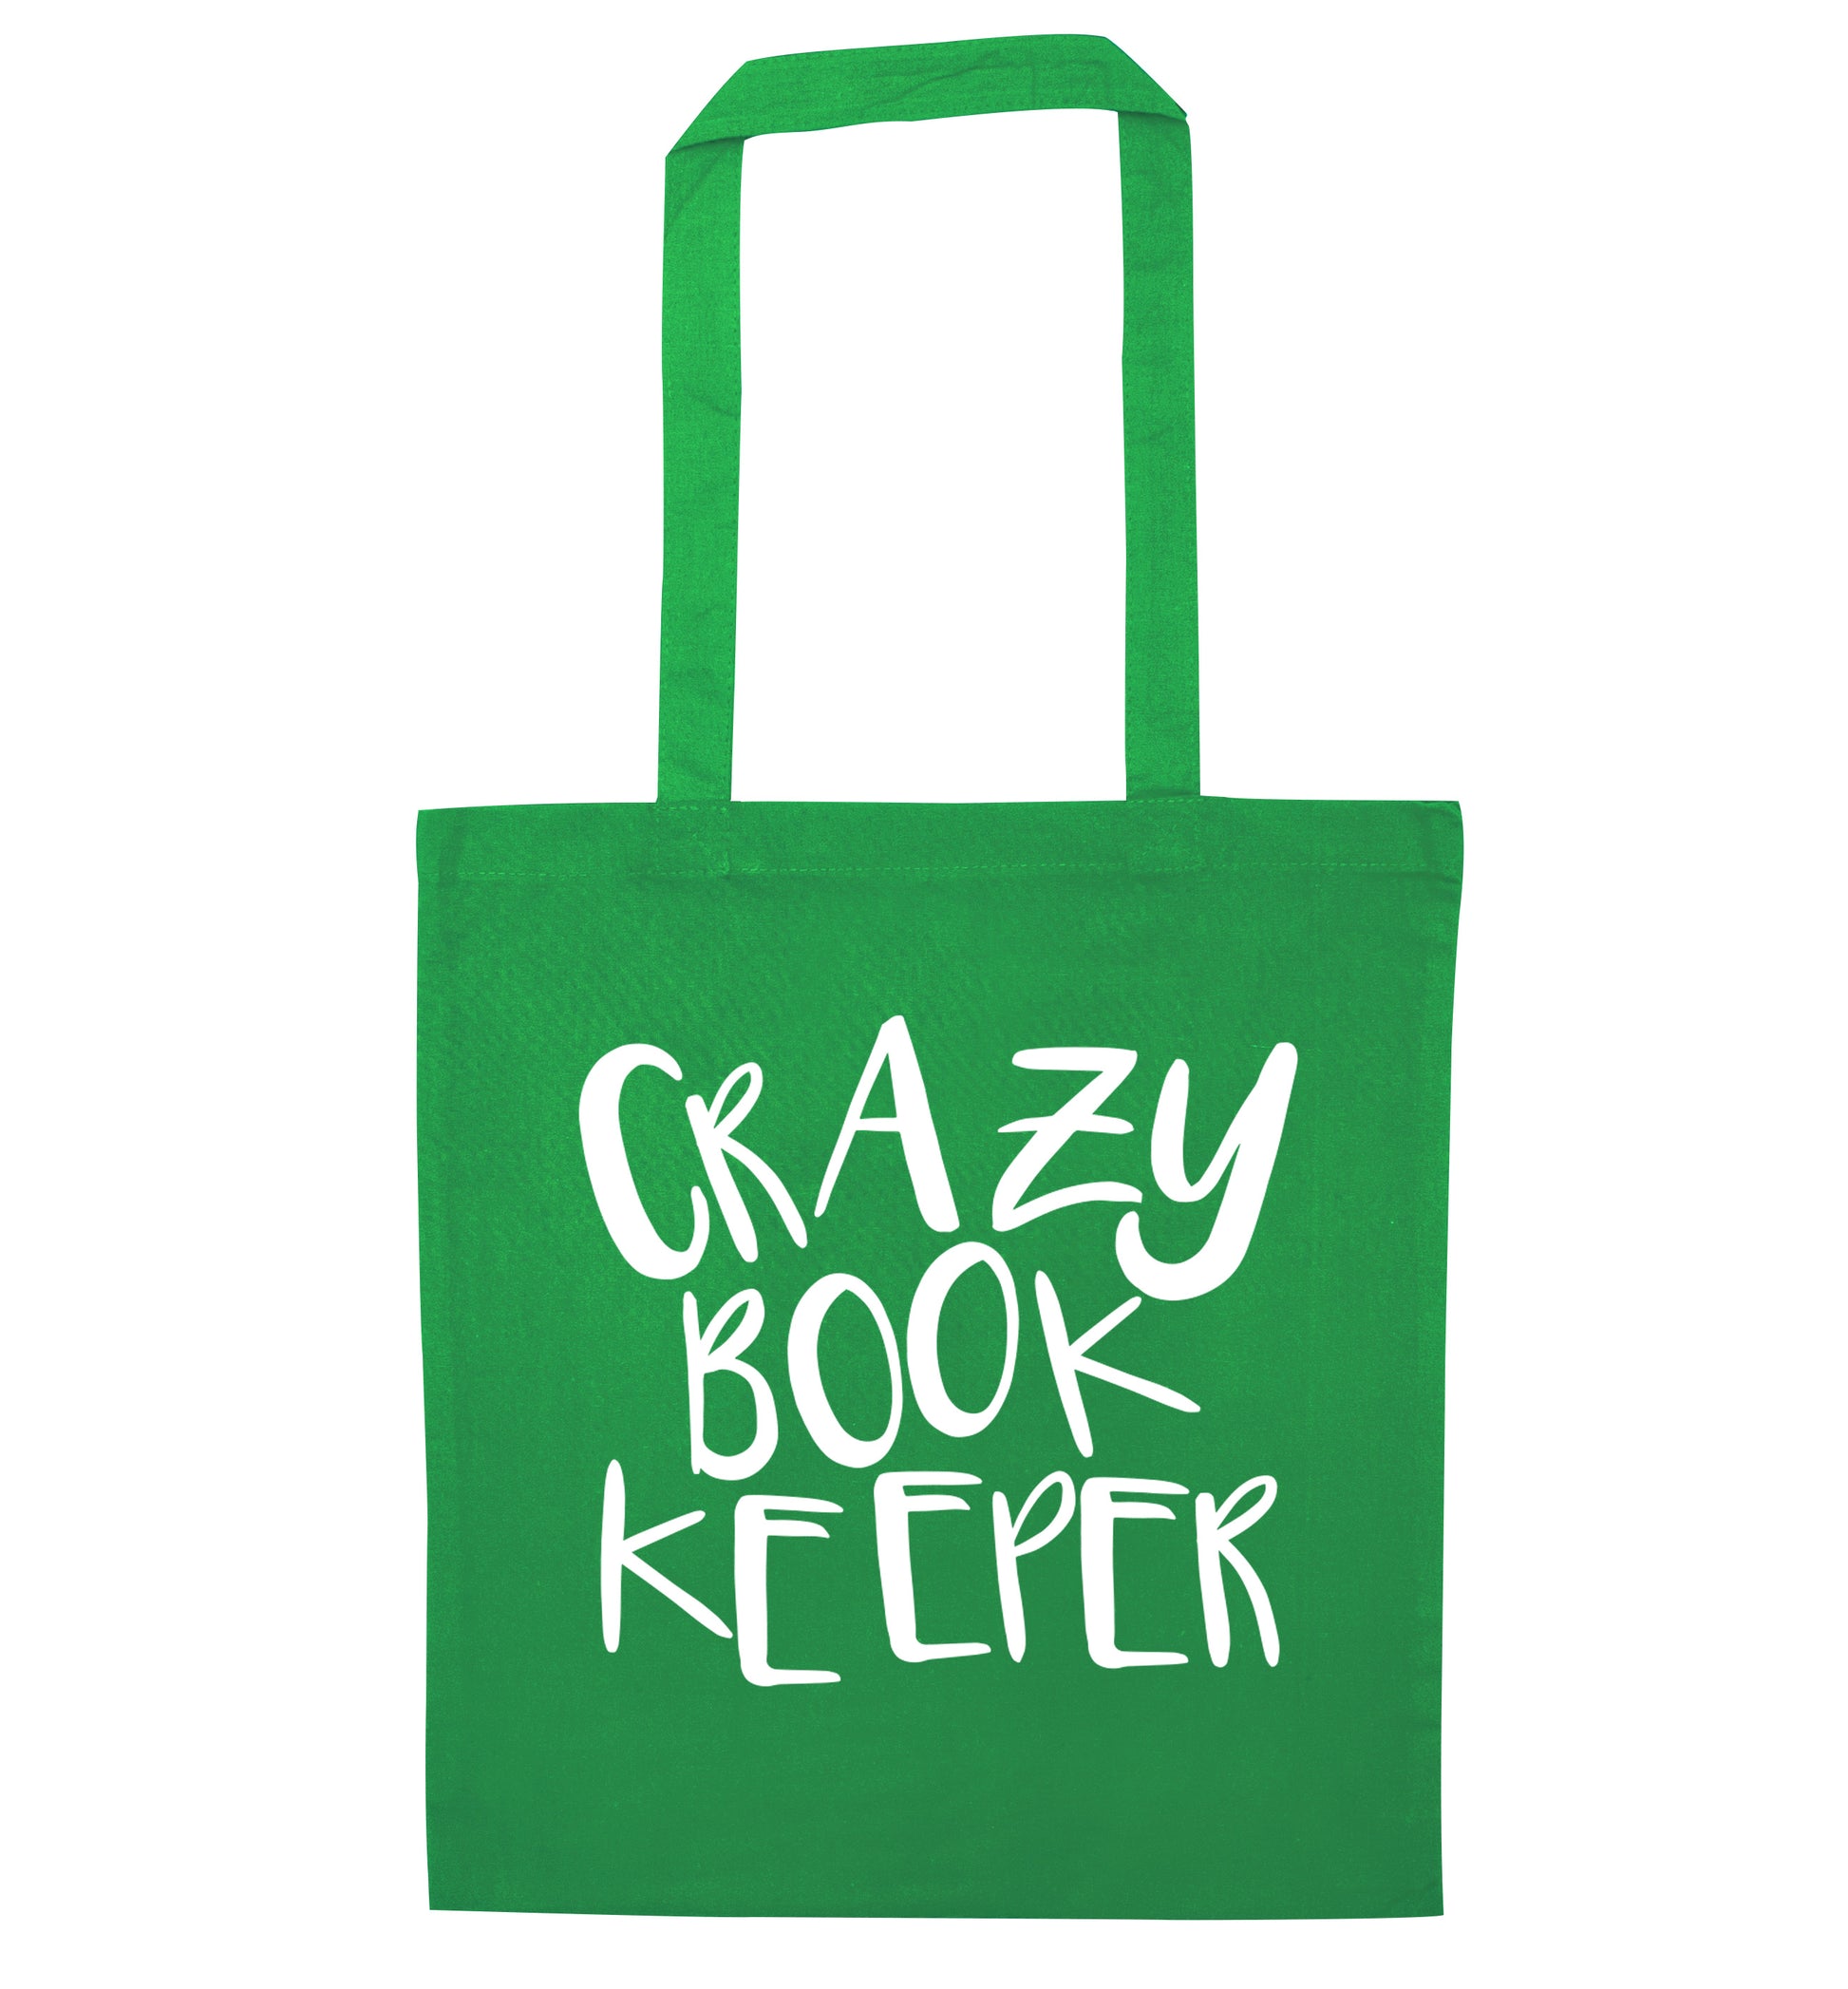 Crazy bookkeeper green tote bag